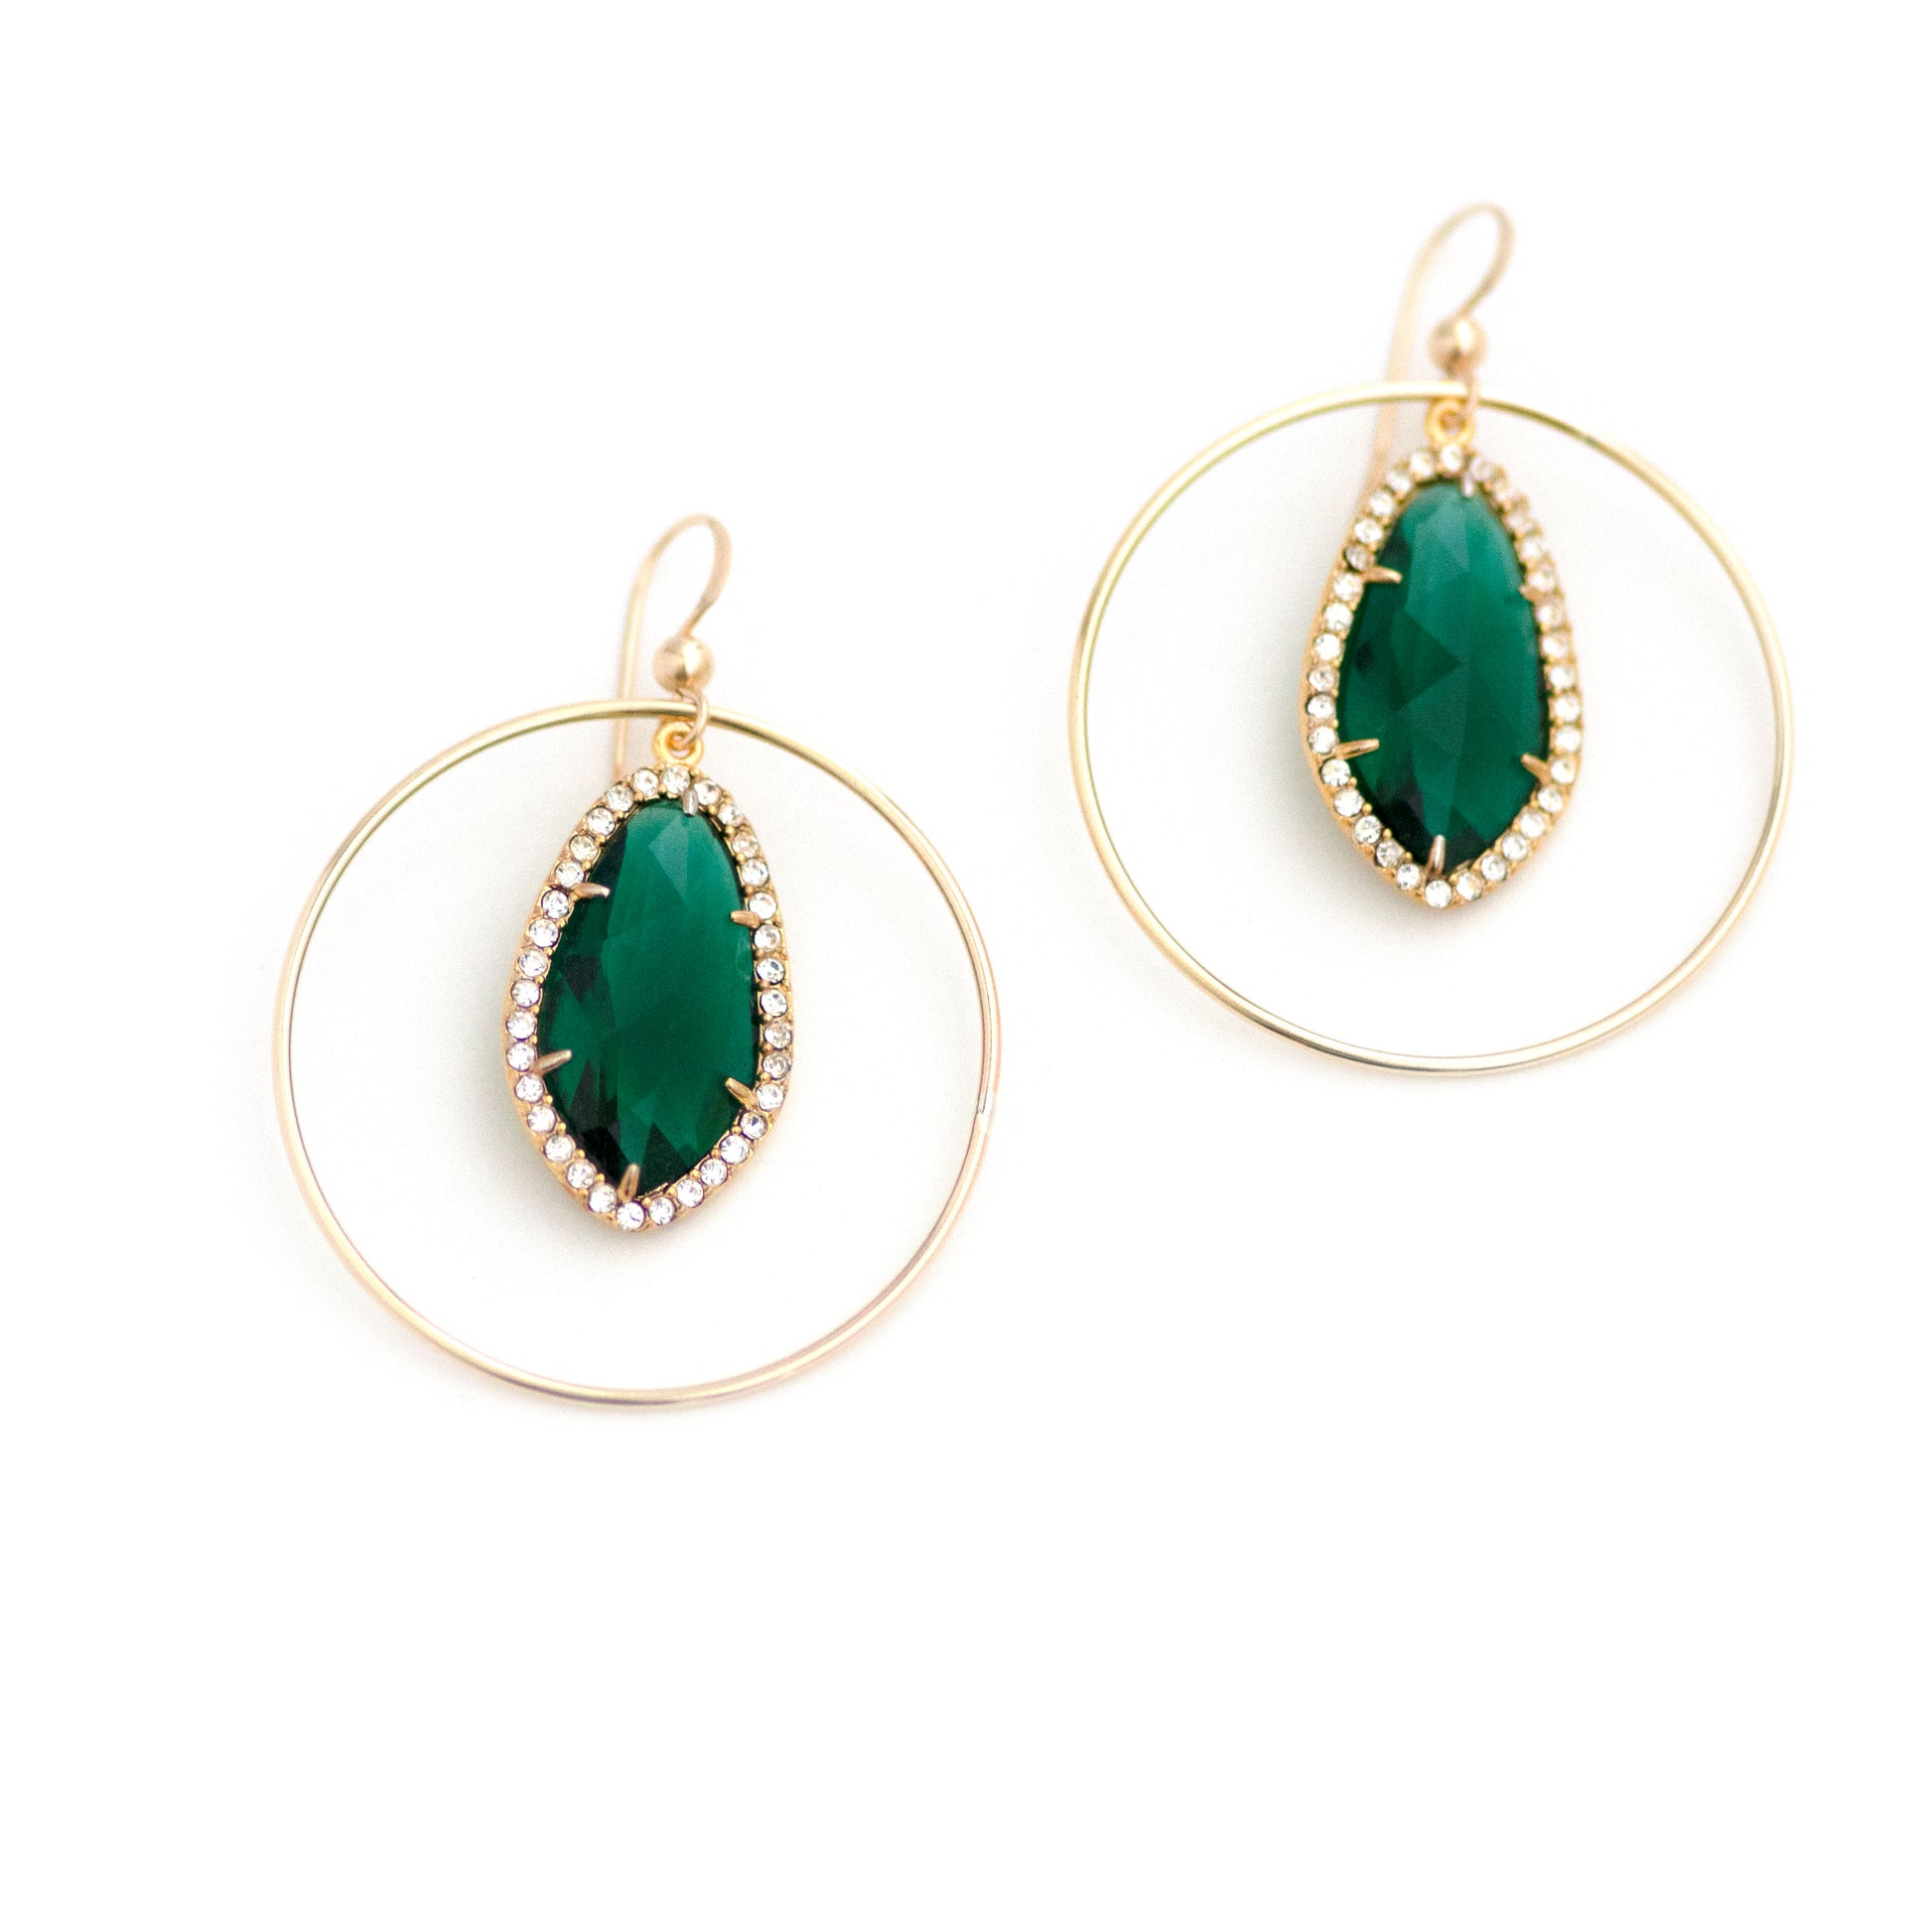 These upcycled vintage earrings are made up of:  Gold tone vintage emerald green crystal rhinestone drops and 14k gold fill.